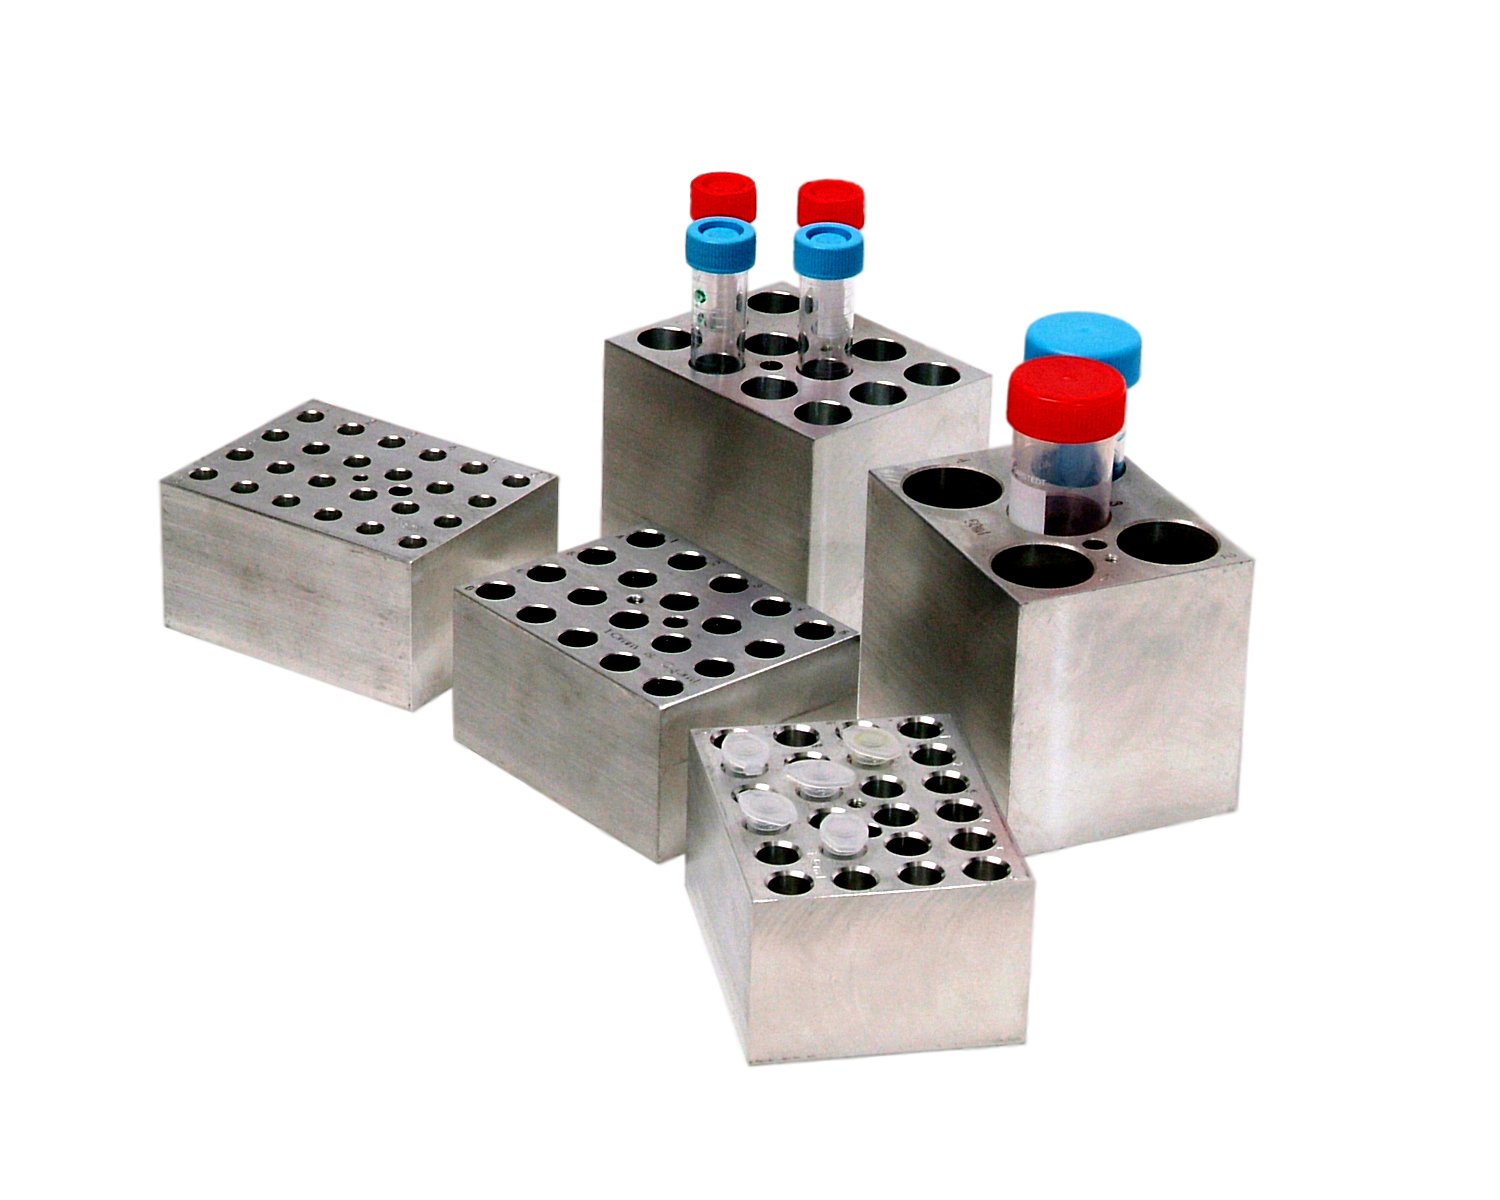 SOLID BLOCK FOR SLIDES OR CUSTOM MACHINING